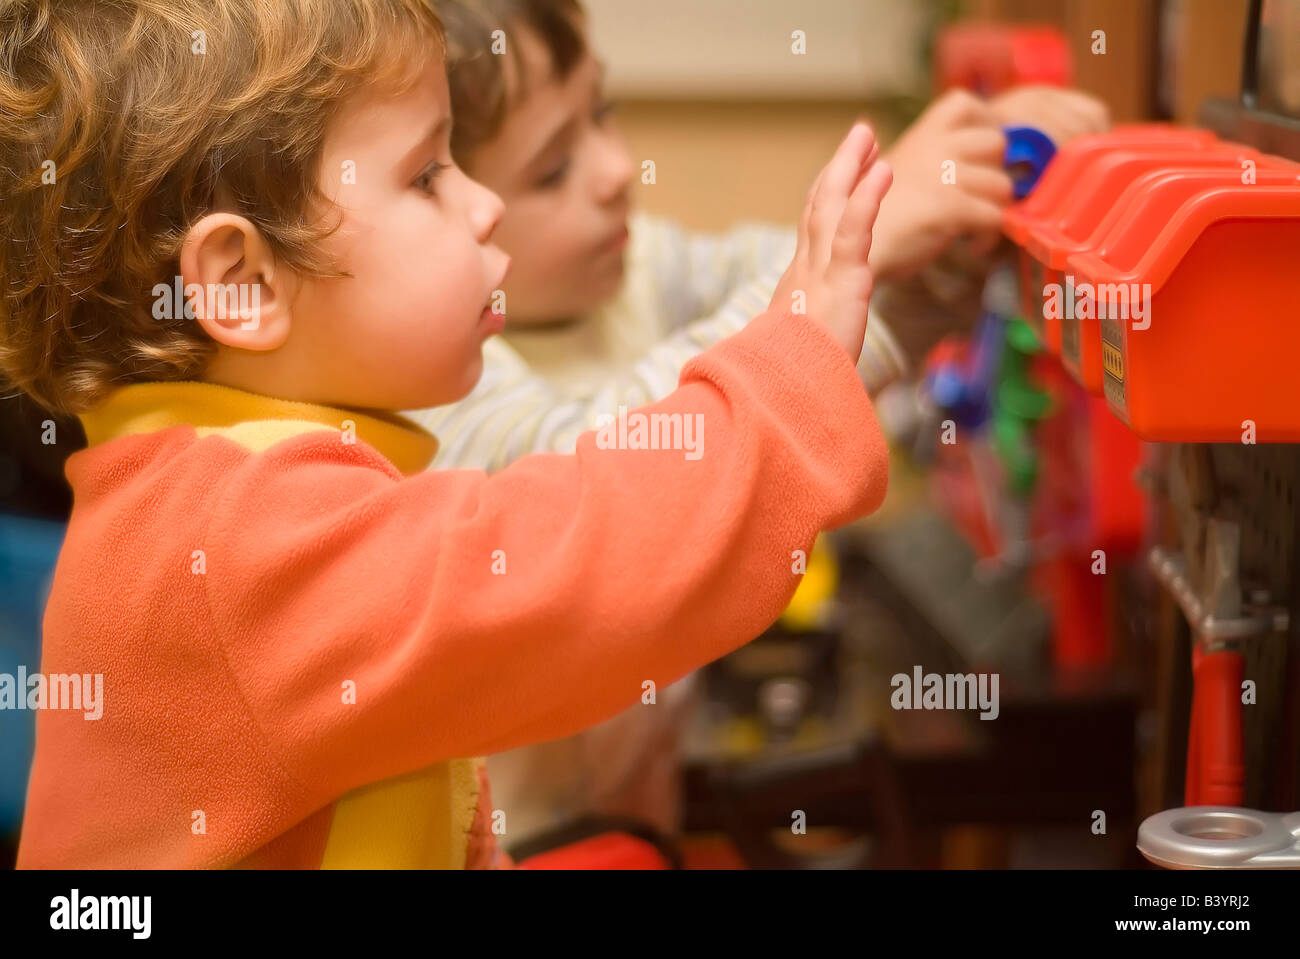 two boys playing with toy tools Stock Photo